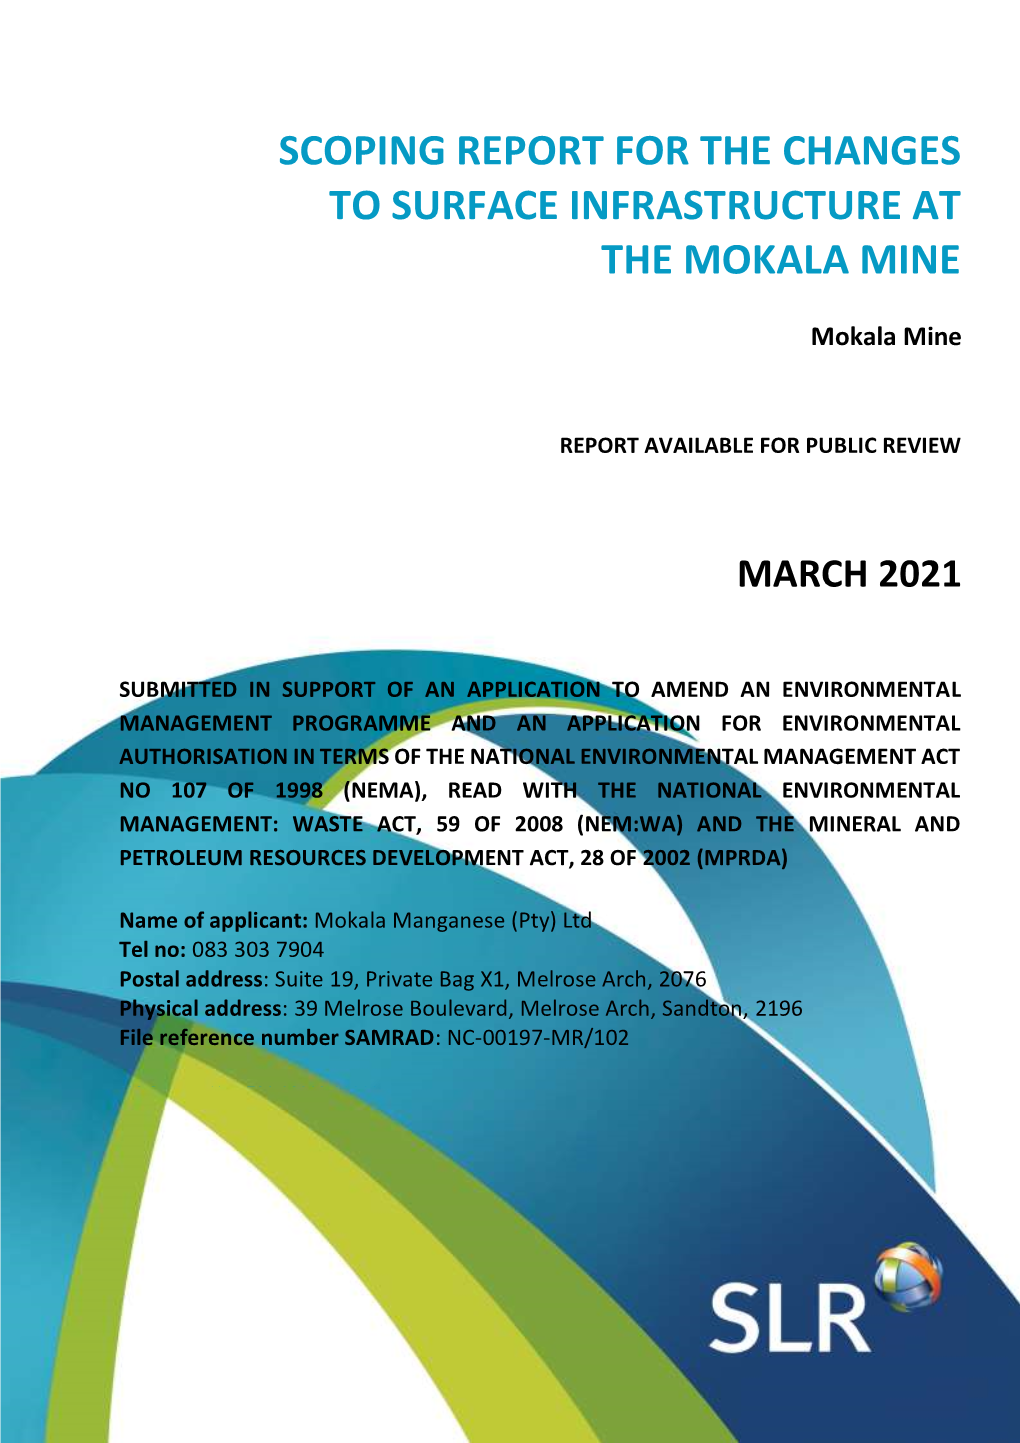 Scoping Report for the Changes to Surface Infrastructure at the Mokala Mine